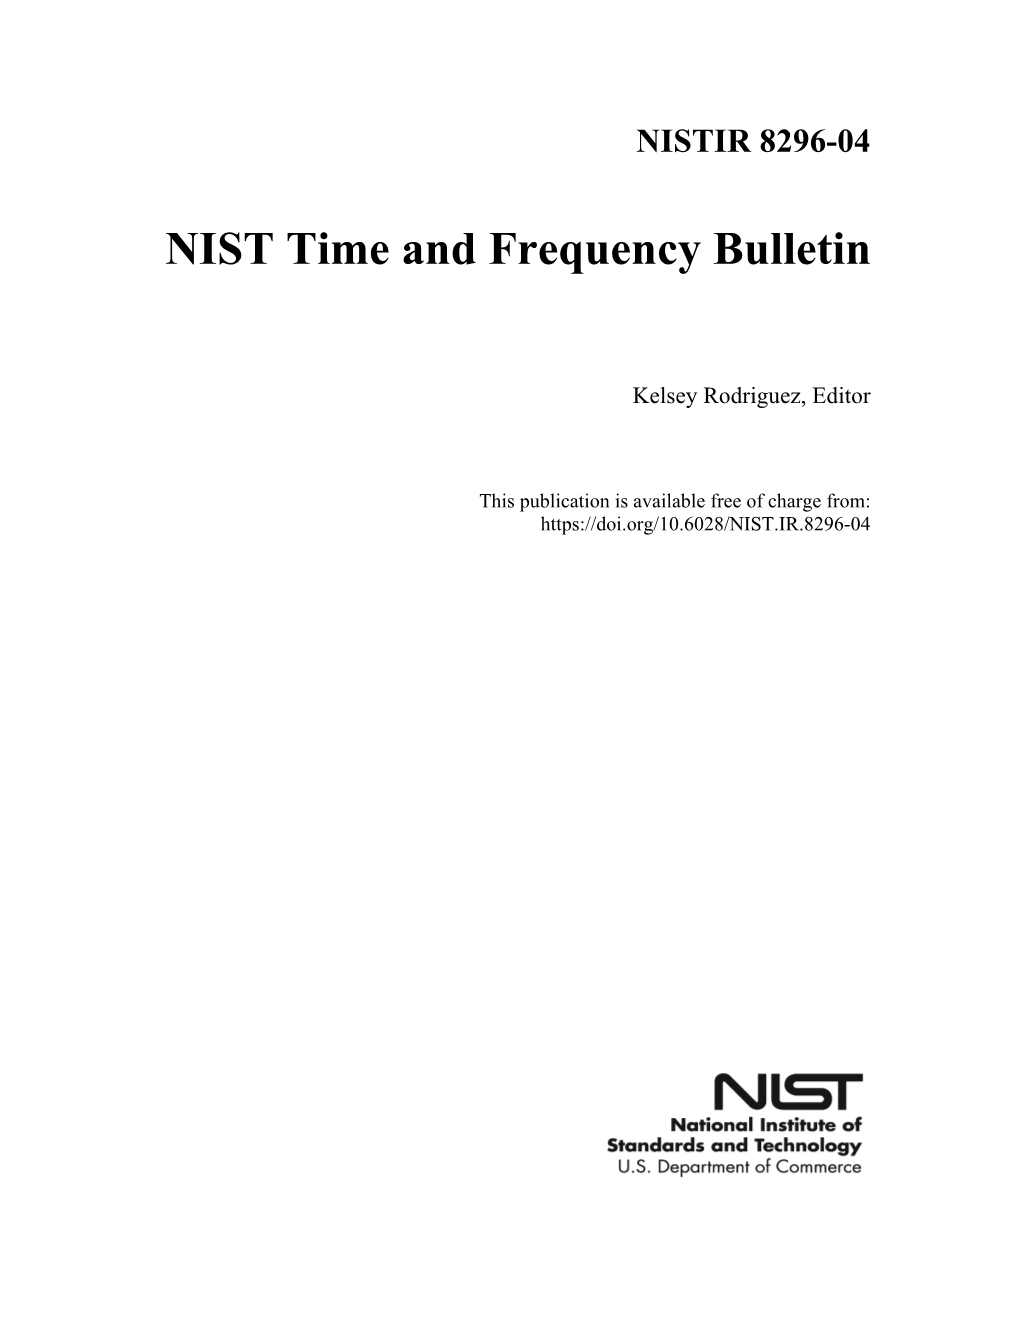 NIST Time and Frequency Bulletin